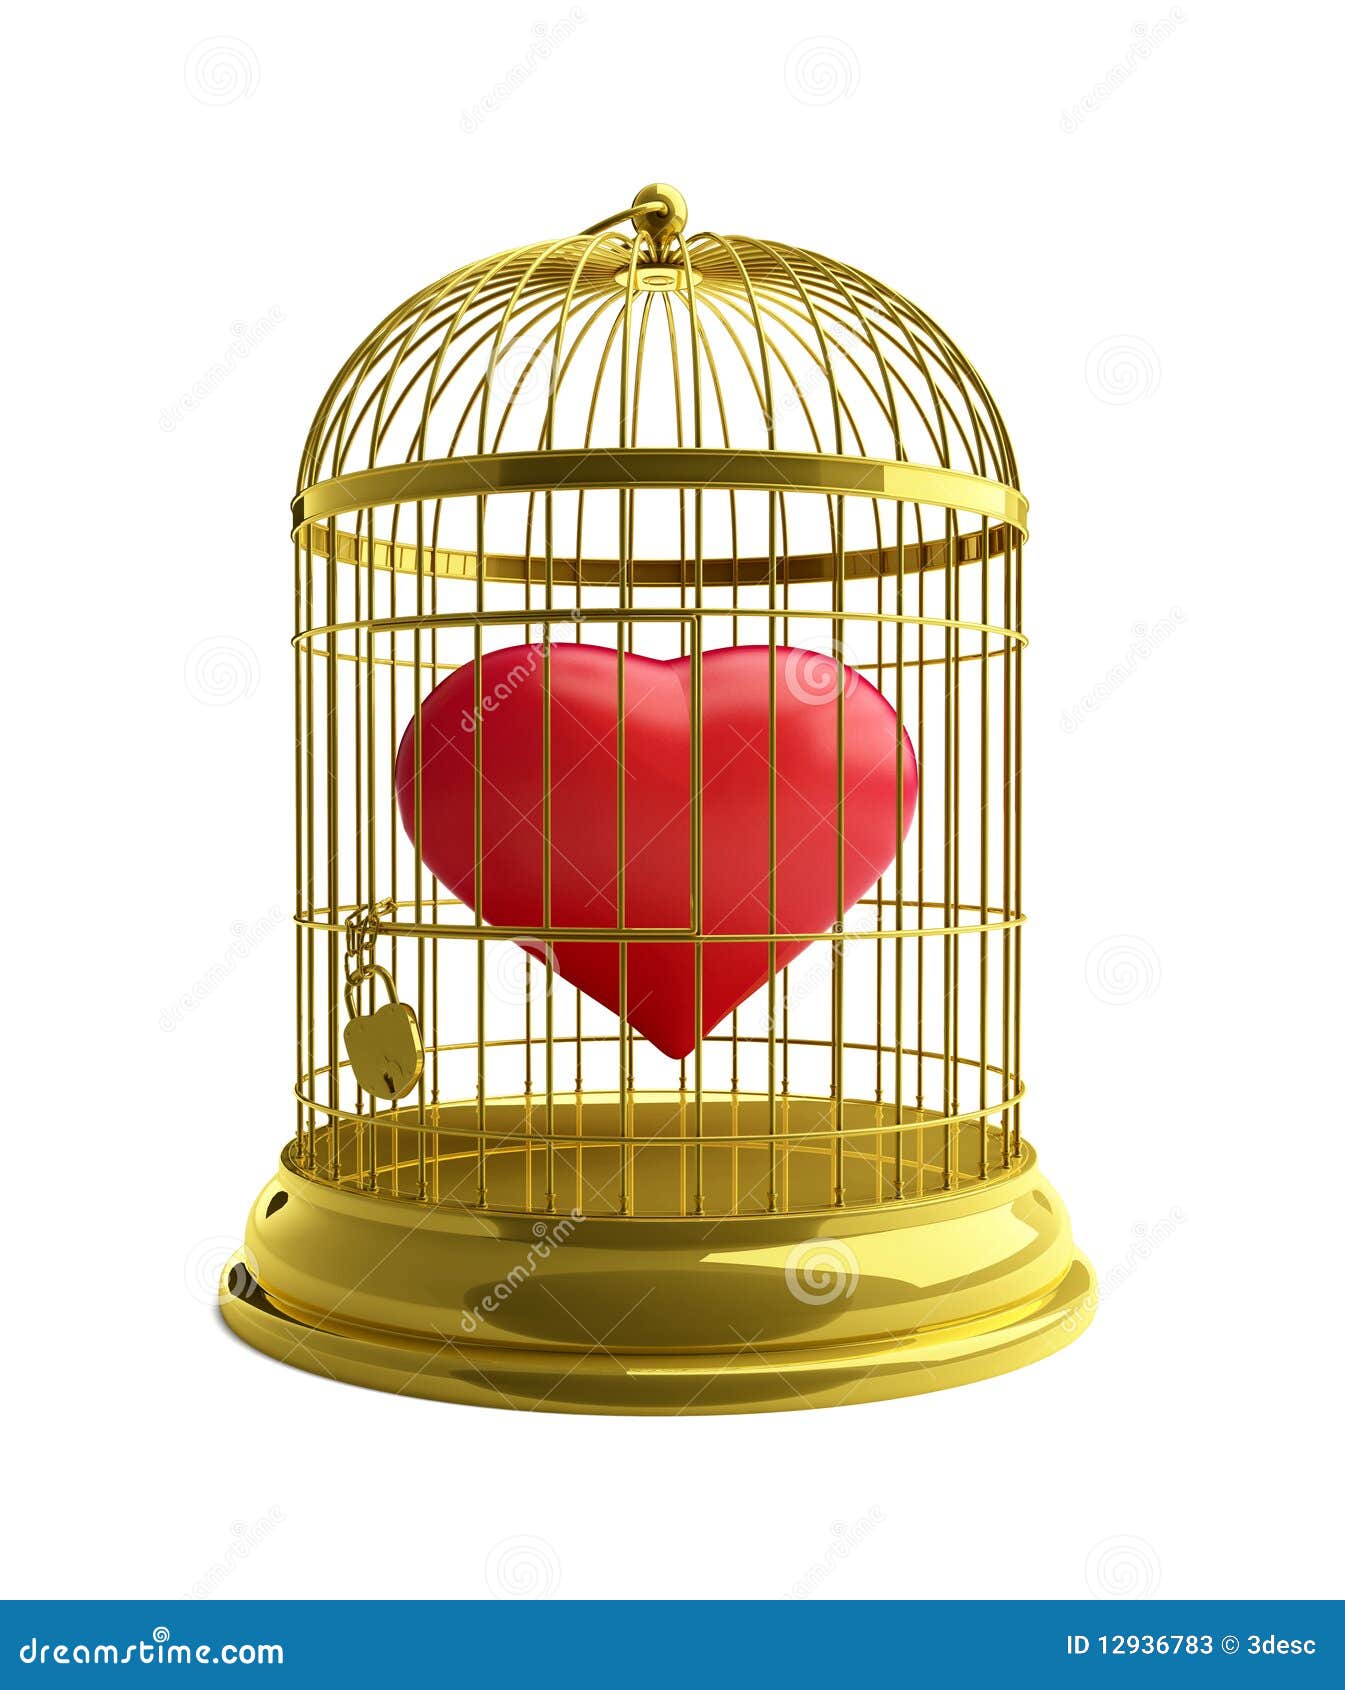 Heart in a golden cage stock illustration. Illustration of love ...